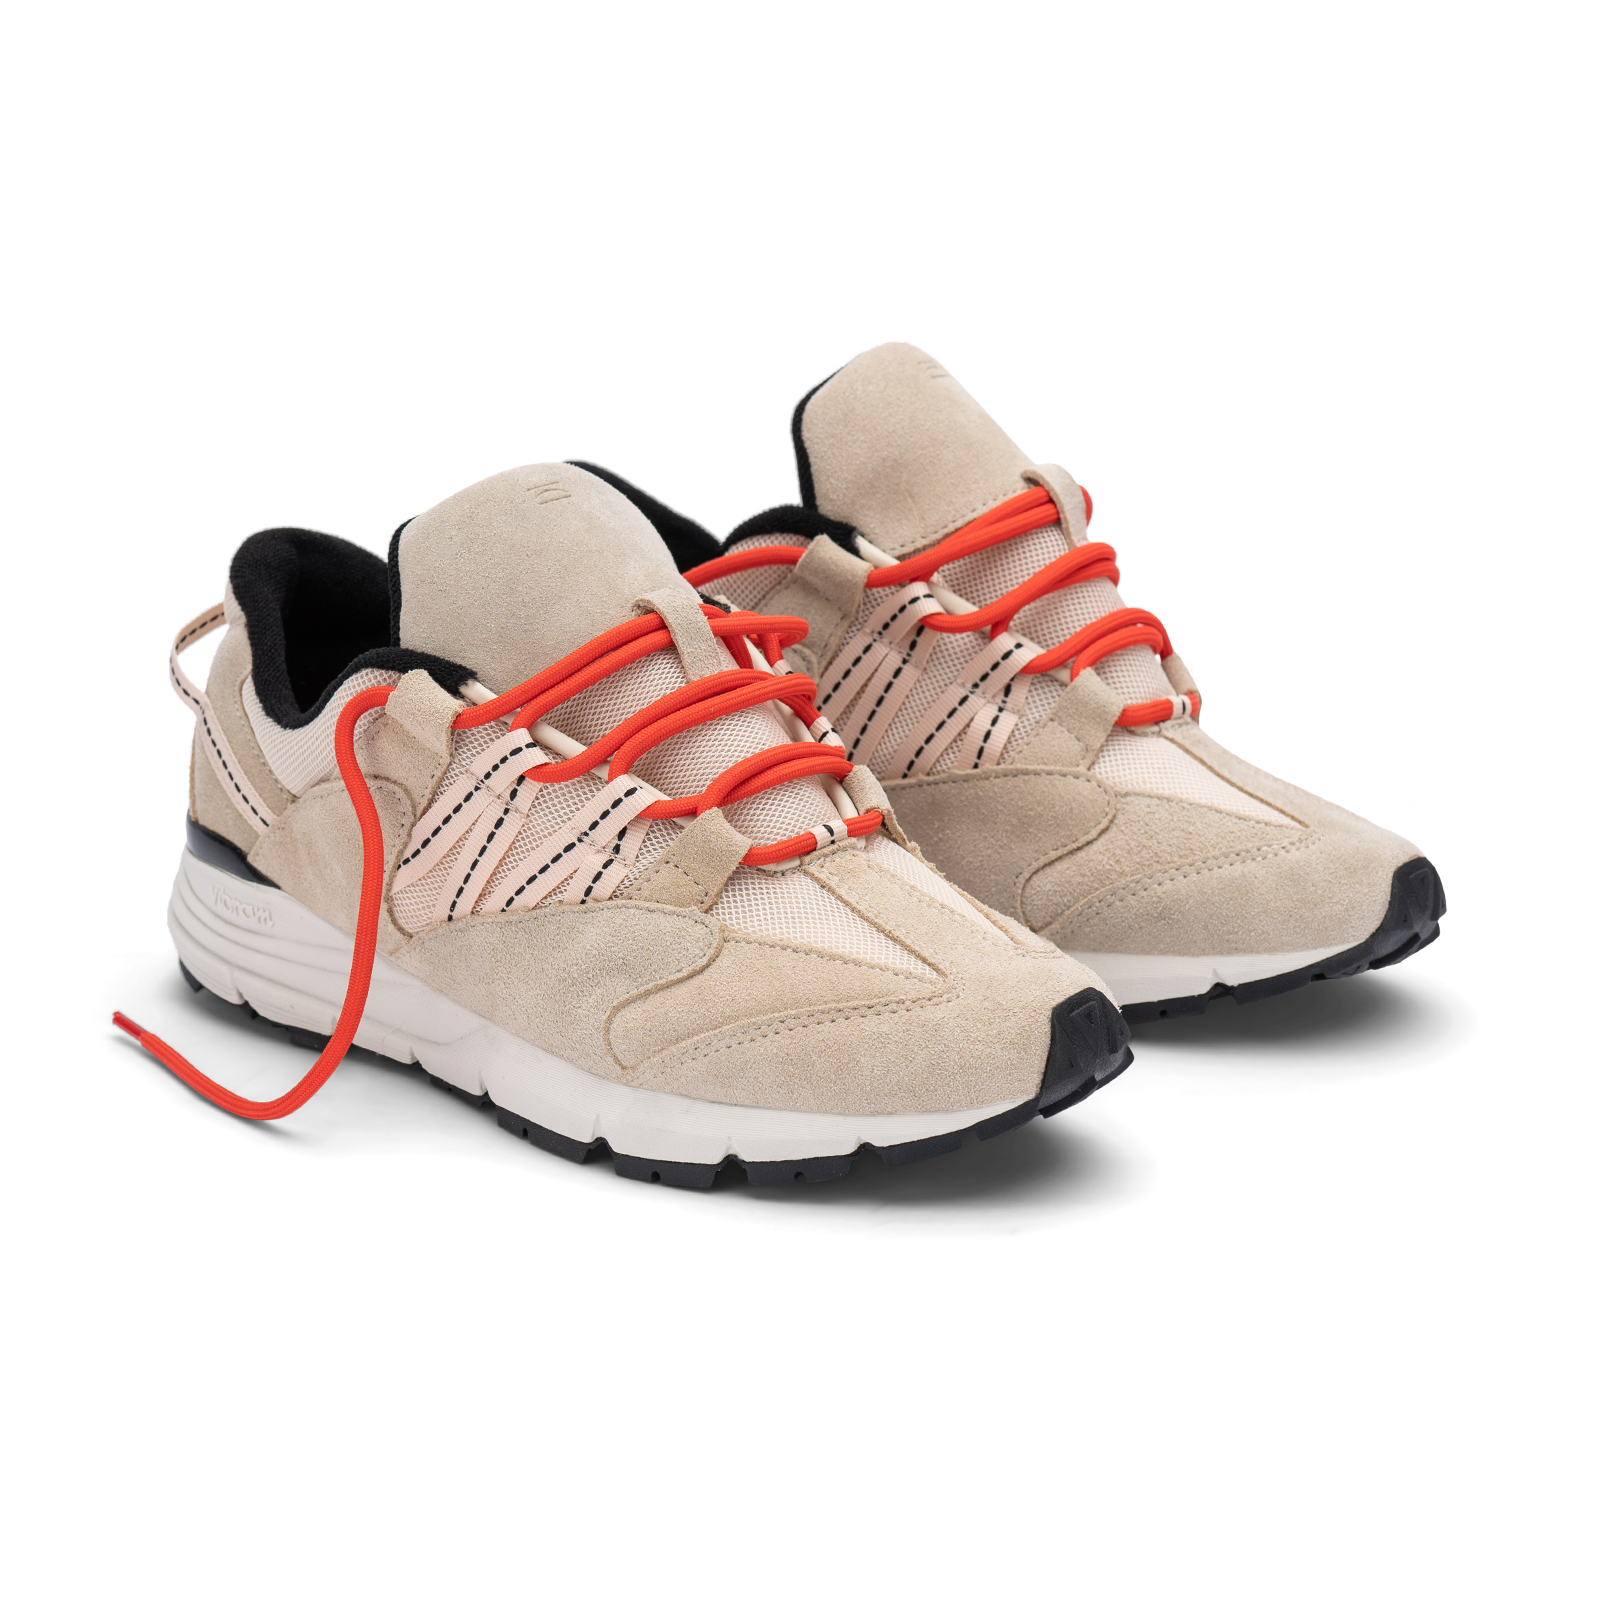 Altiutude / Safari front 3/4 view khaki suede / air mesh / webbing lace holder with orange lace on a vibram sole